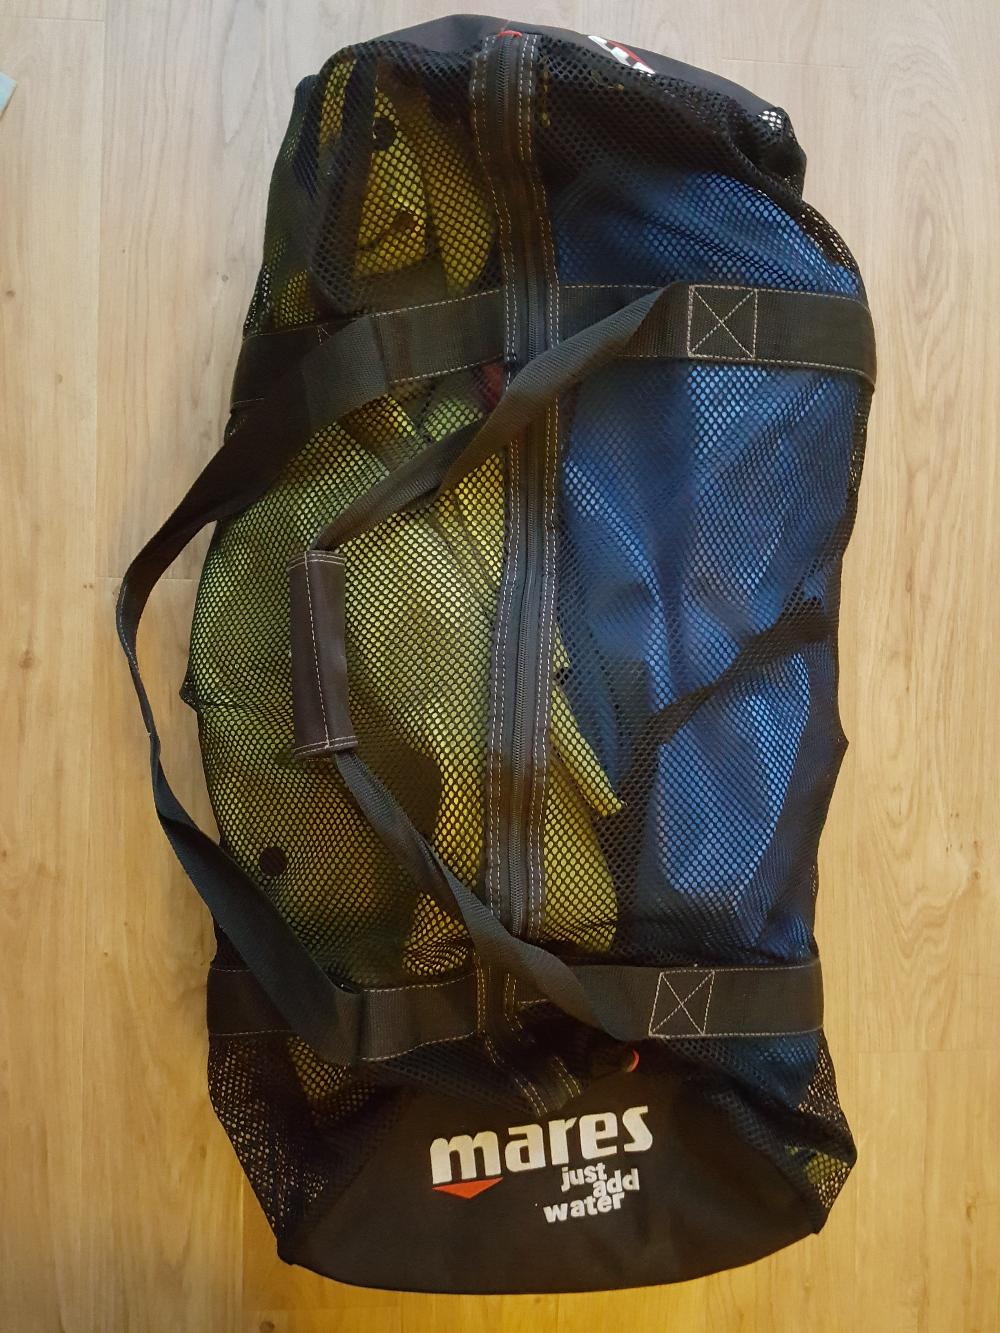 Keep all of your sea swimming gear in a dive bag